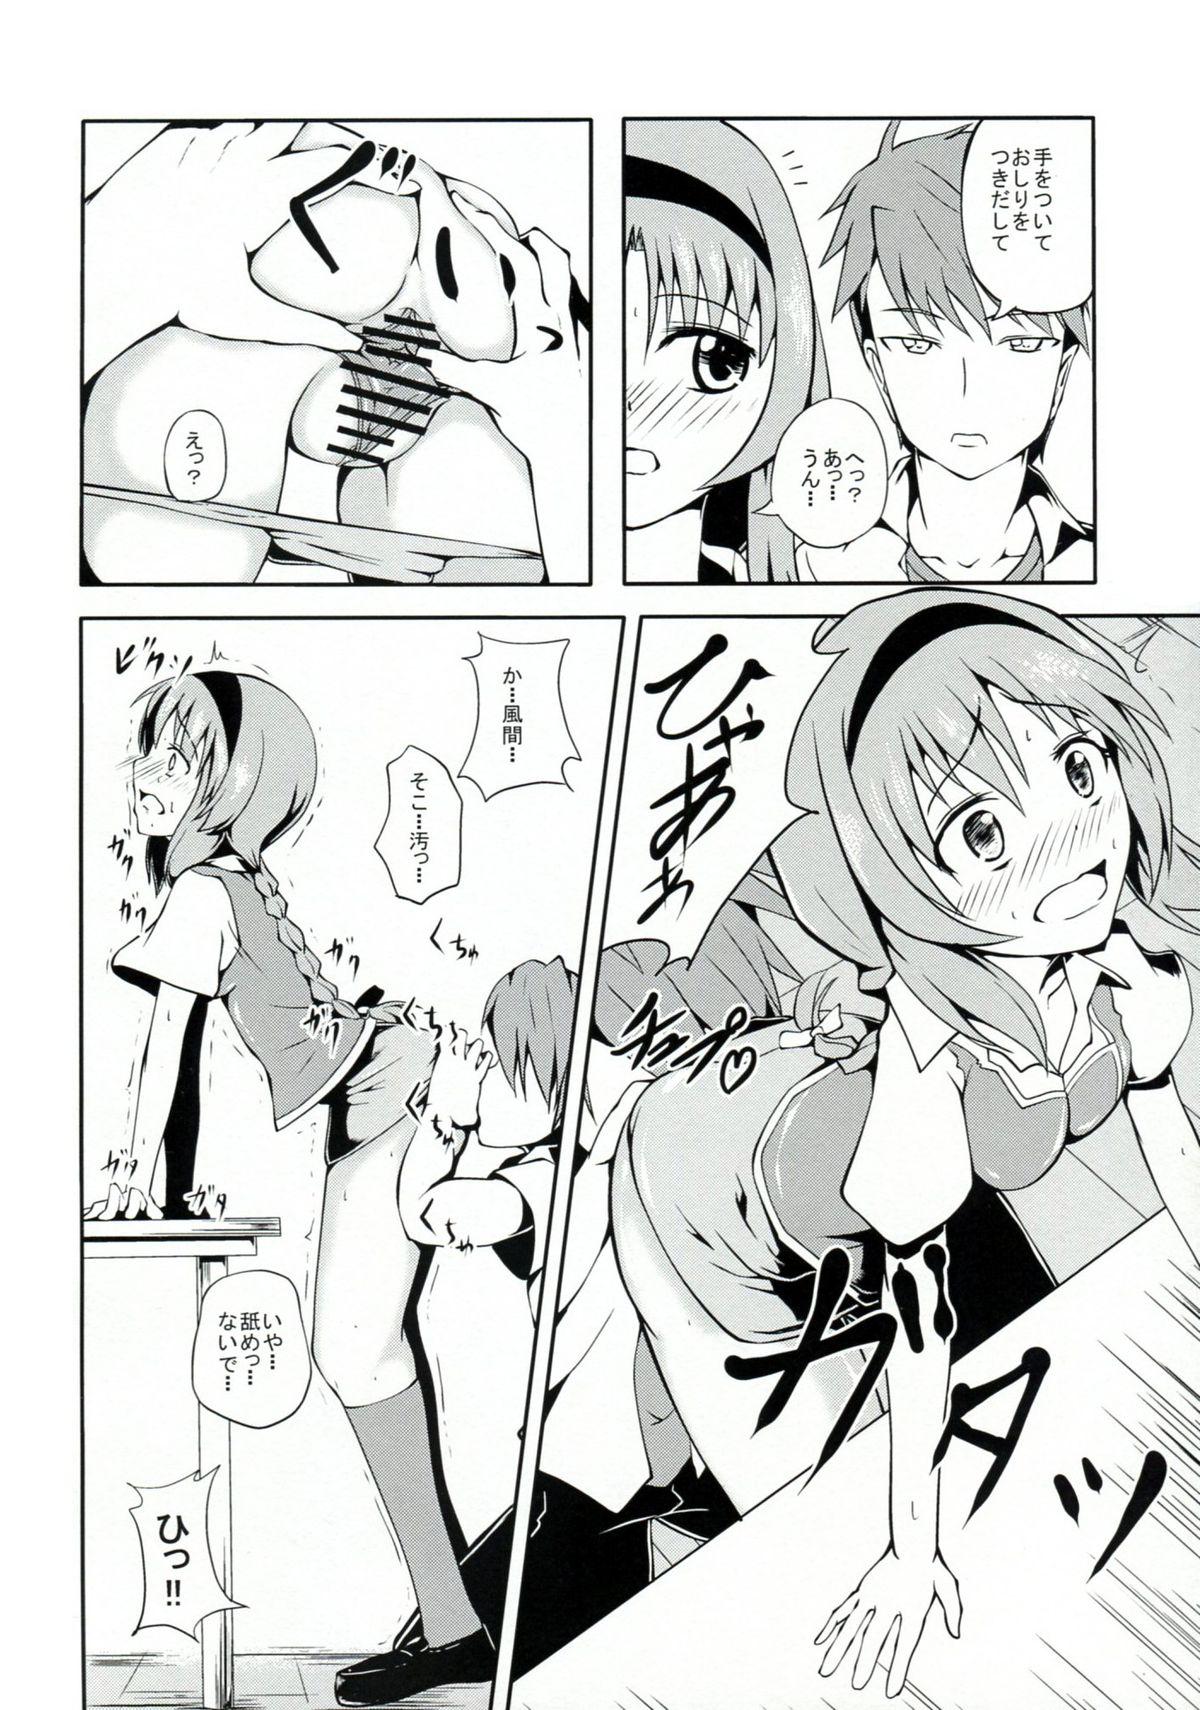 Licking Takao Thunder - D frag Mmf - Page 7